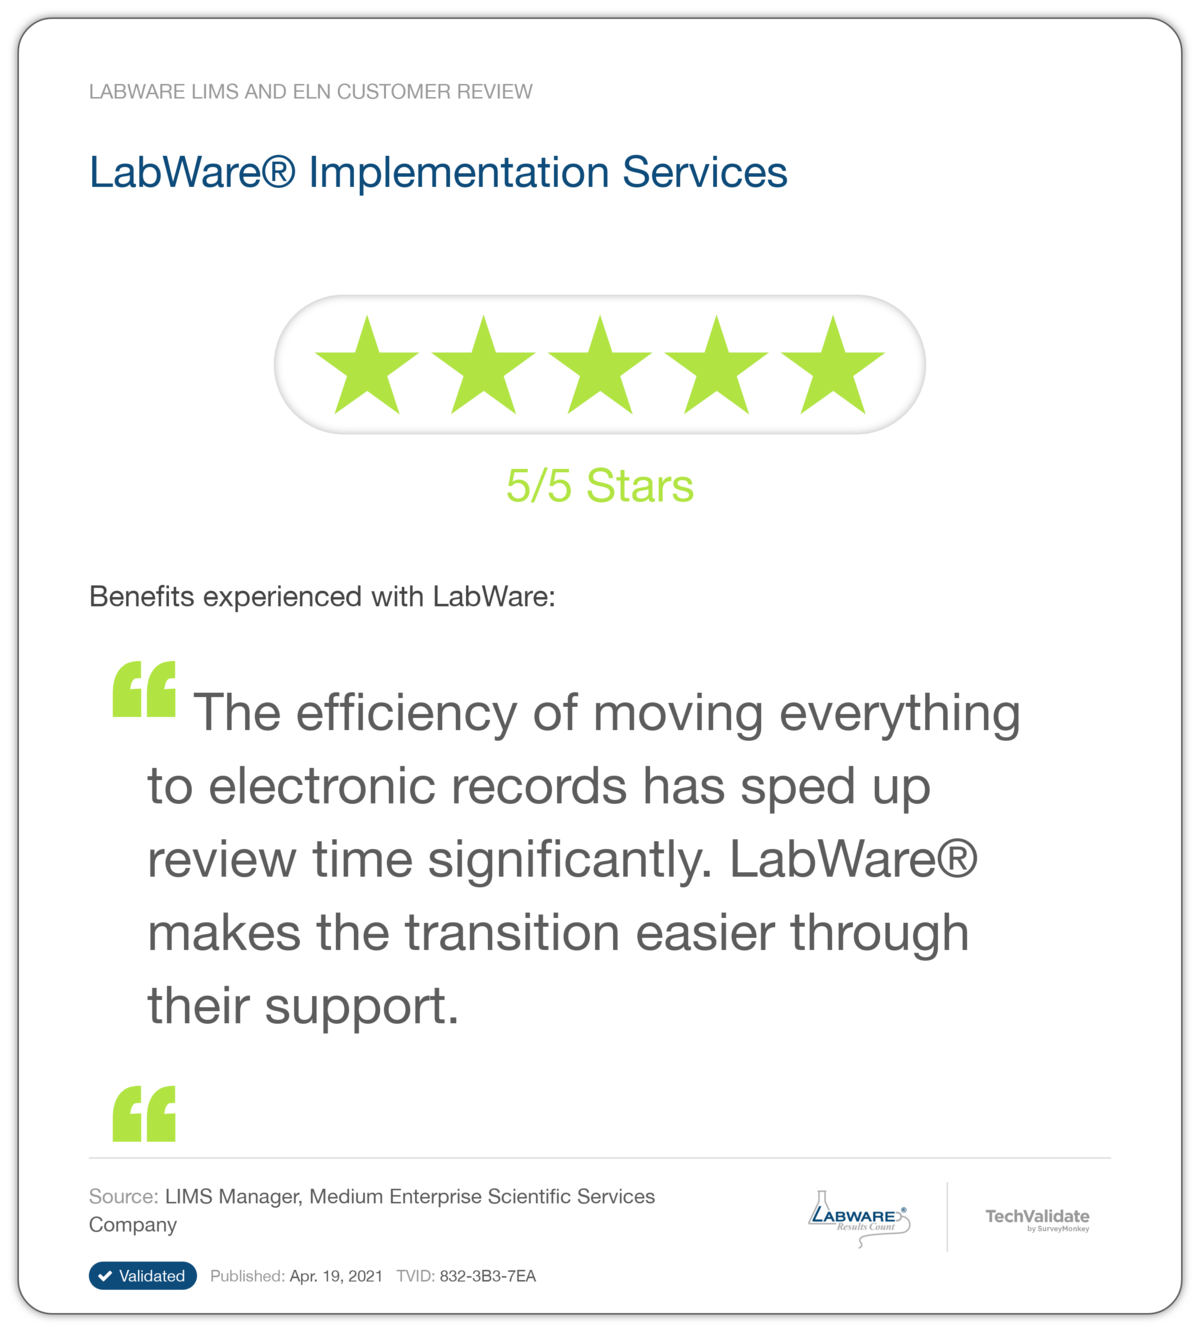 LabWare® Implementation Services